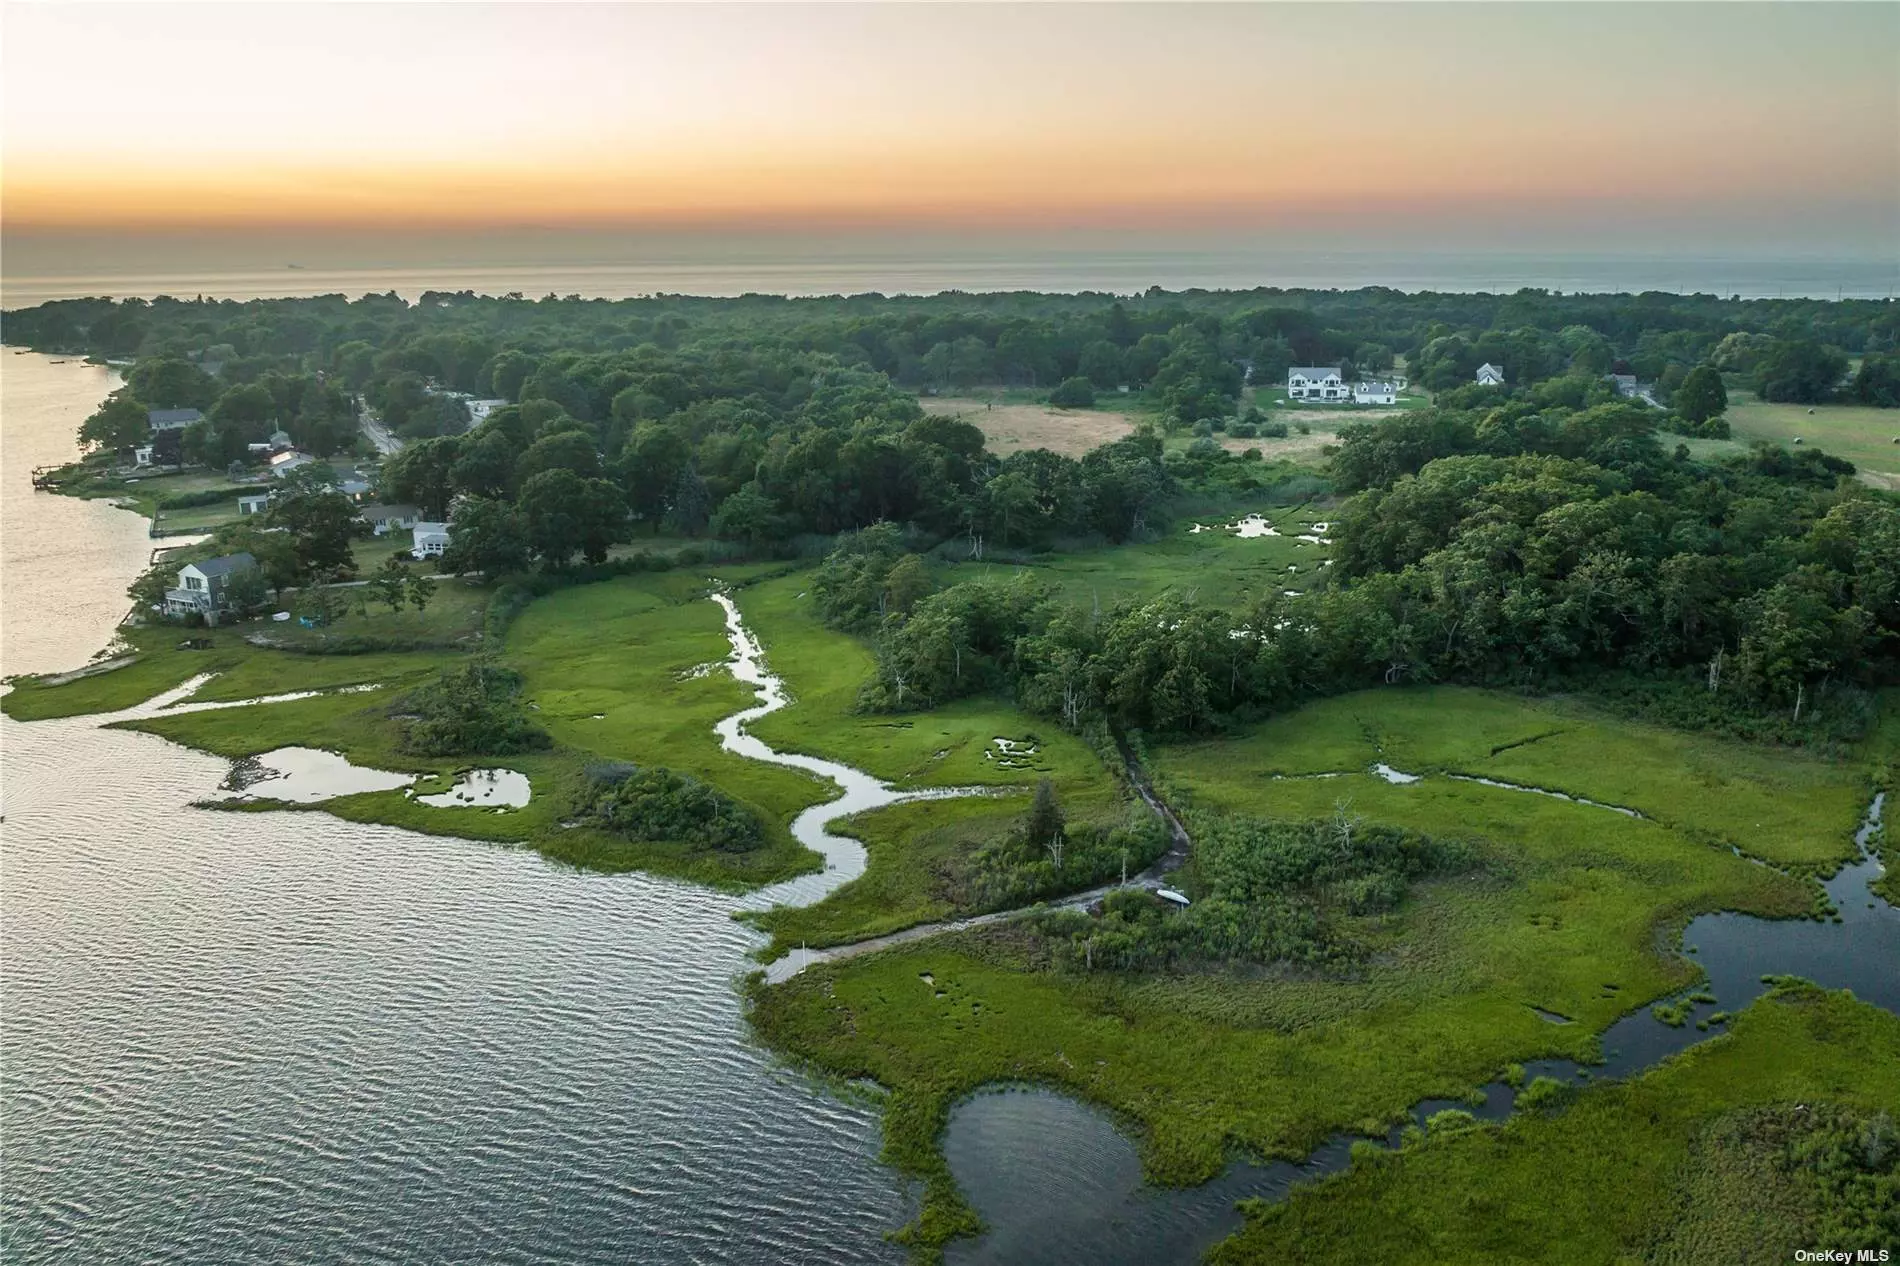 Down a graceful country road, on the North Fork of Long Island your dream home awaits. Sprawling over 13 acres with 354 feet of waterfront on Arshamomaque Pond leading out to the Peconic Bay. There is a 20 x 40 gunite pool, a barn with horse stalls should you choose or for use as an art barn! Plenty of room for tennis. Inside this magical home is an exceptional chef&rsquo;s kitchen with a Wolf range, butler&rsquo;s pantry and plenty of entertaining space - including a generous fireplace and a 3 season porch. There are two wings - one which has 3 ensuite bedrooms, including the primary suite. The other has a full kitchen, two bedrooms and 1 bathroom. This home also features a wine cellar and walkout basement. A property of this caliber does not come to the market often on the North Fork of Long Island. Let&rsquo;s make your dreams come true - this could be you!!